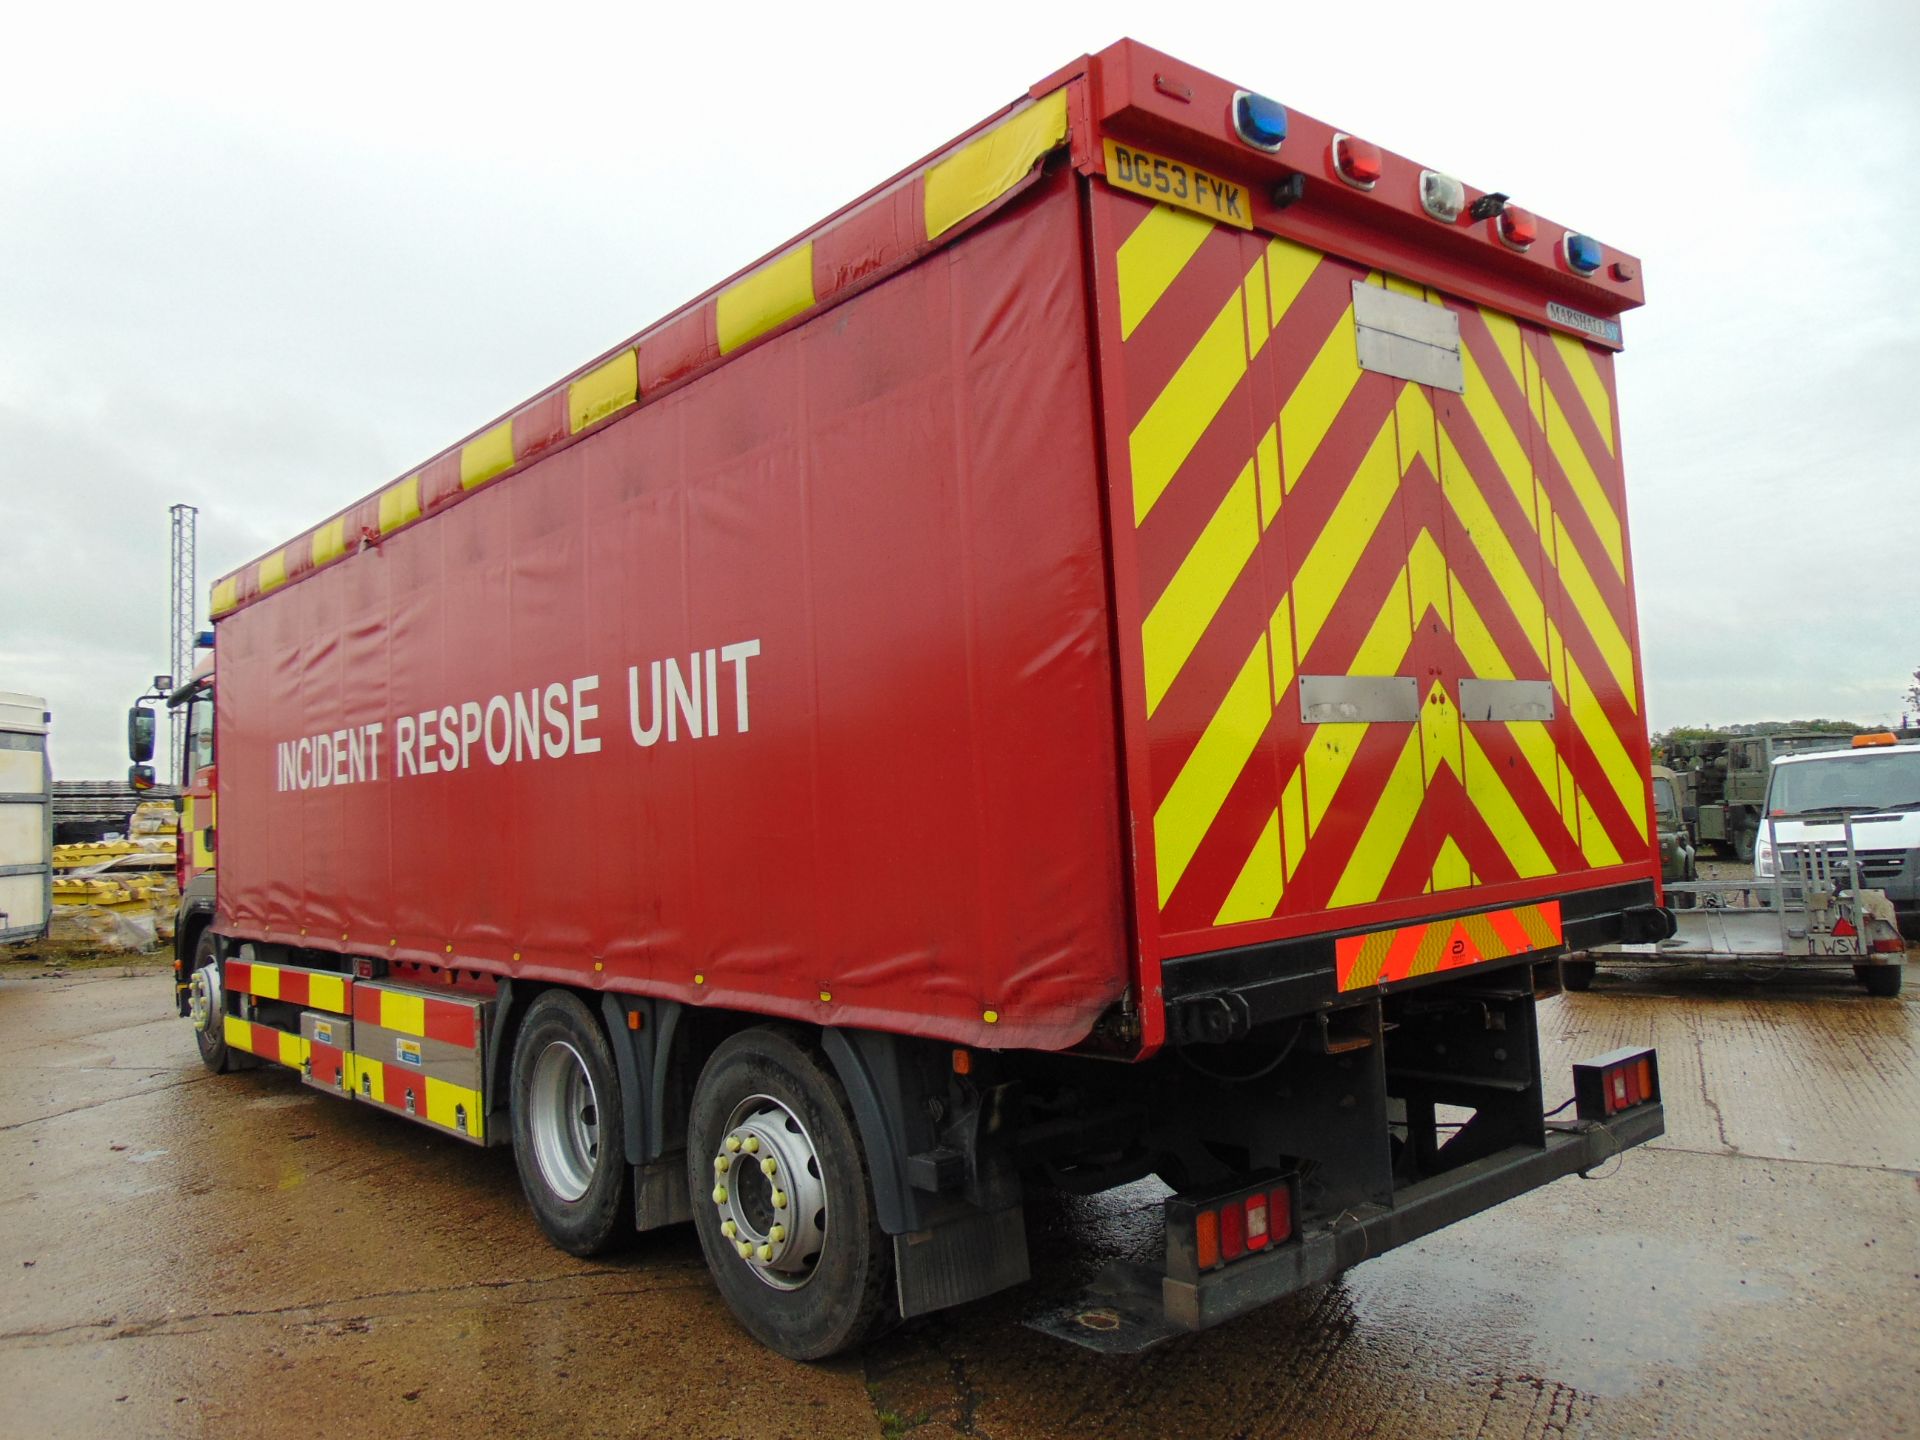 2004 MAN TG-A 6x2 Rear Steer Incident Support Unit - Image 8 of 27